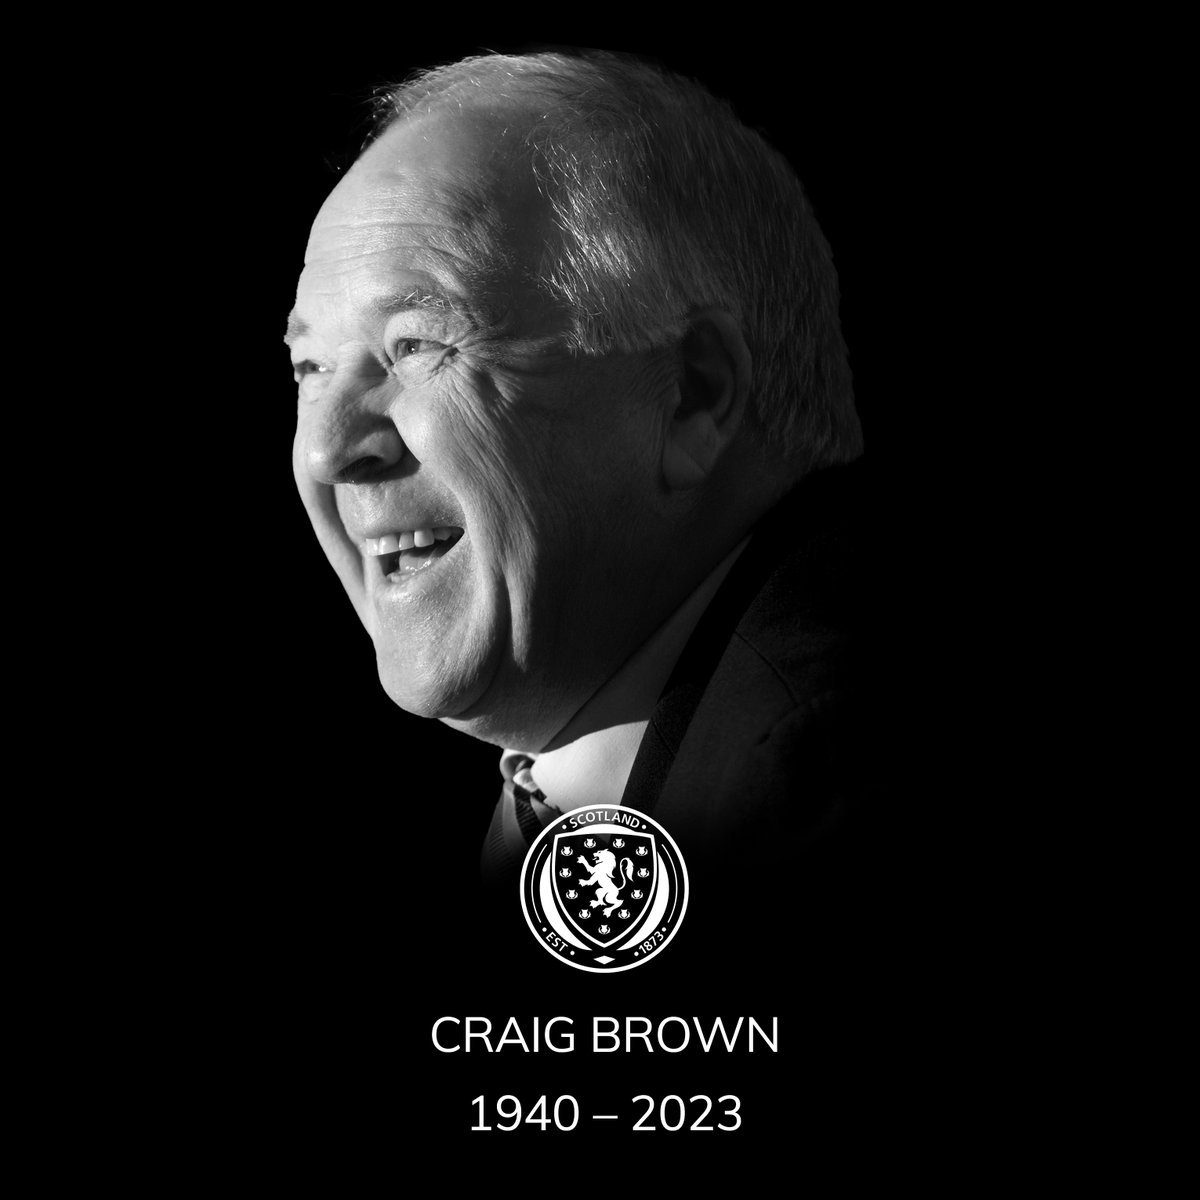 A true Scotland legend. Our thoughts are with Craig’s loved ones at this sad time.